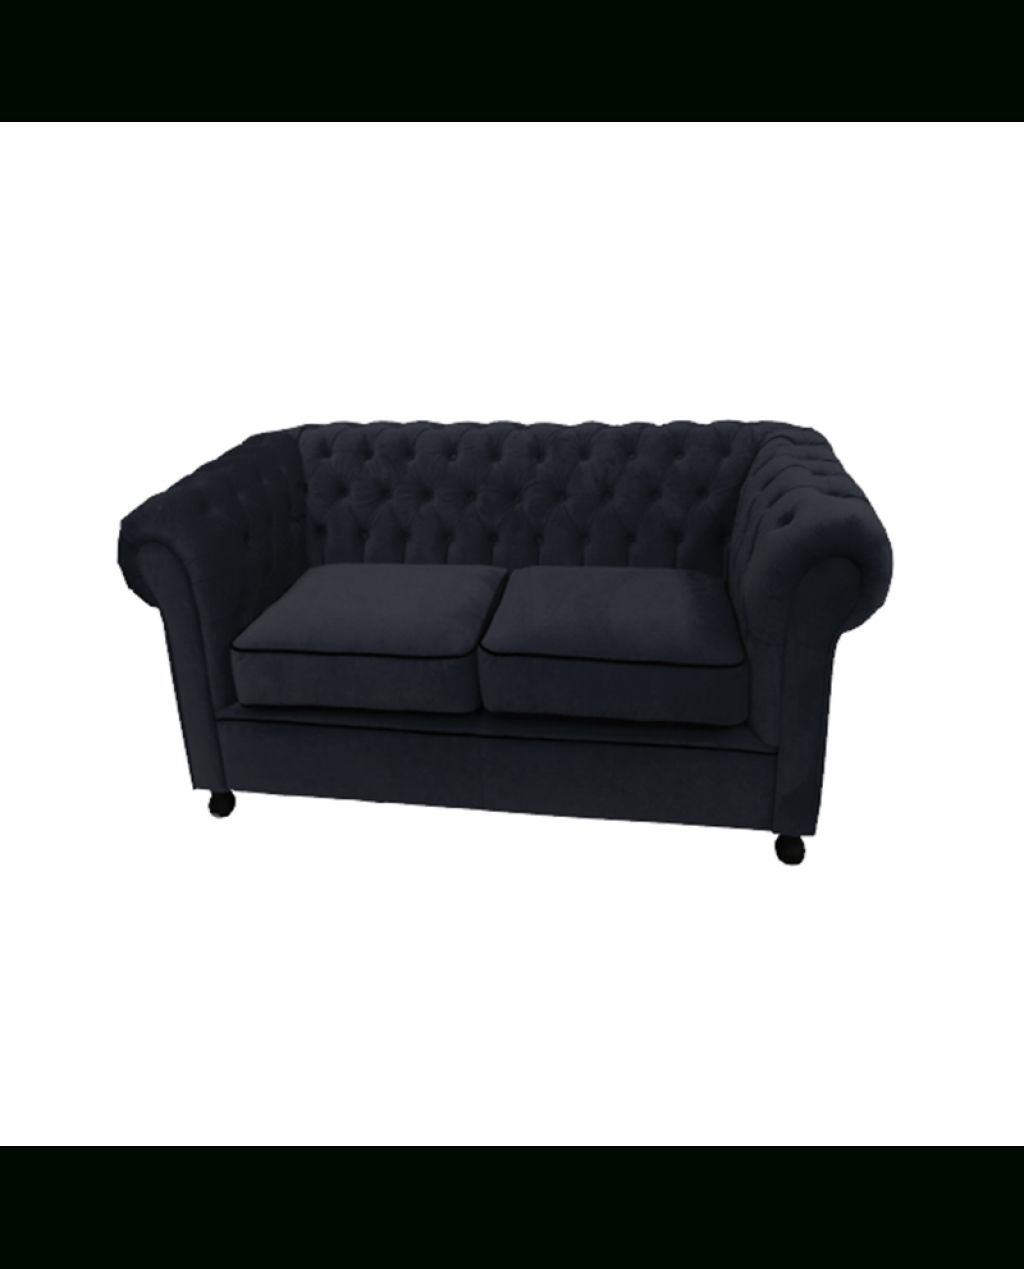 Black Velvet Chesterfield Style 2 Seater Sofa Hire Intended For Black 2 Seater Sofas (View 7 of 20)